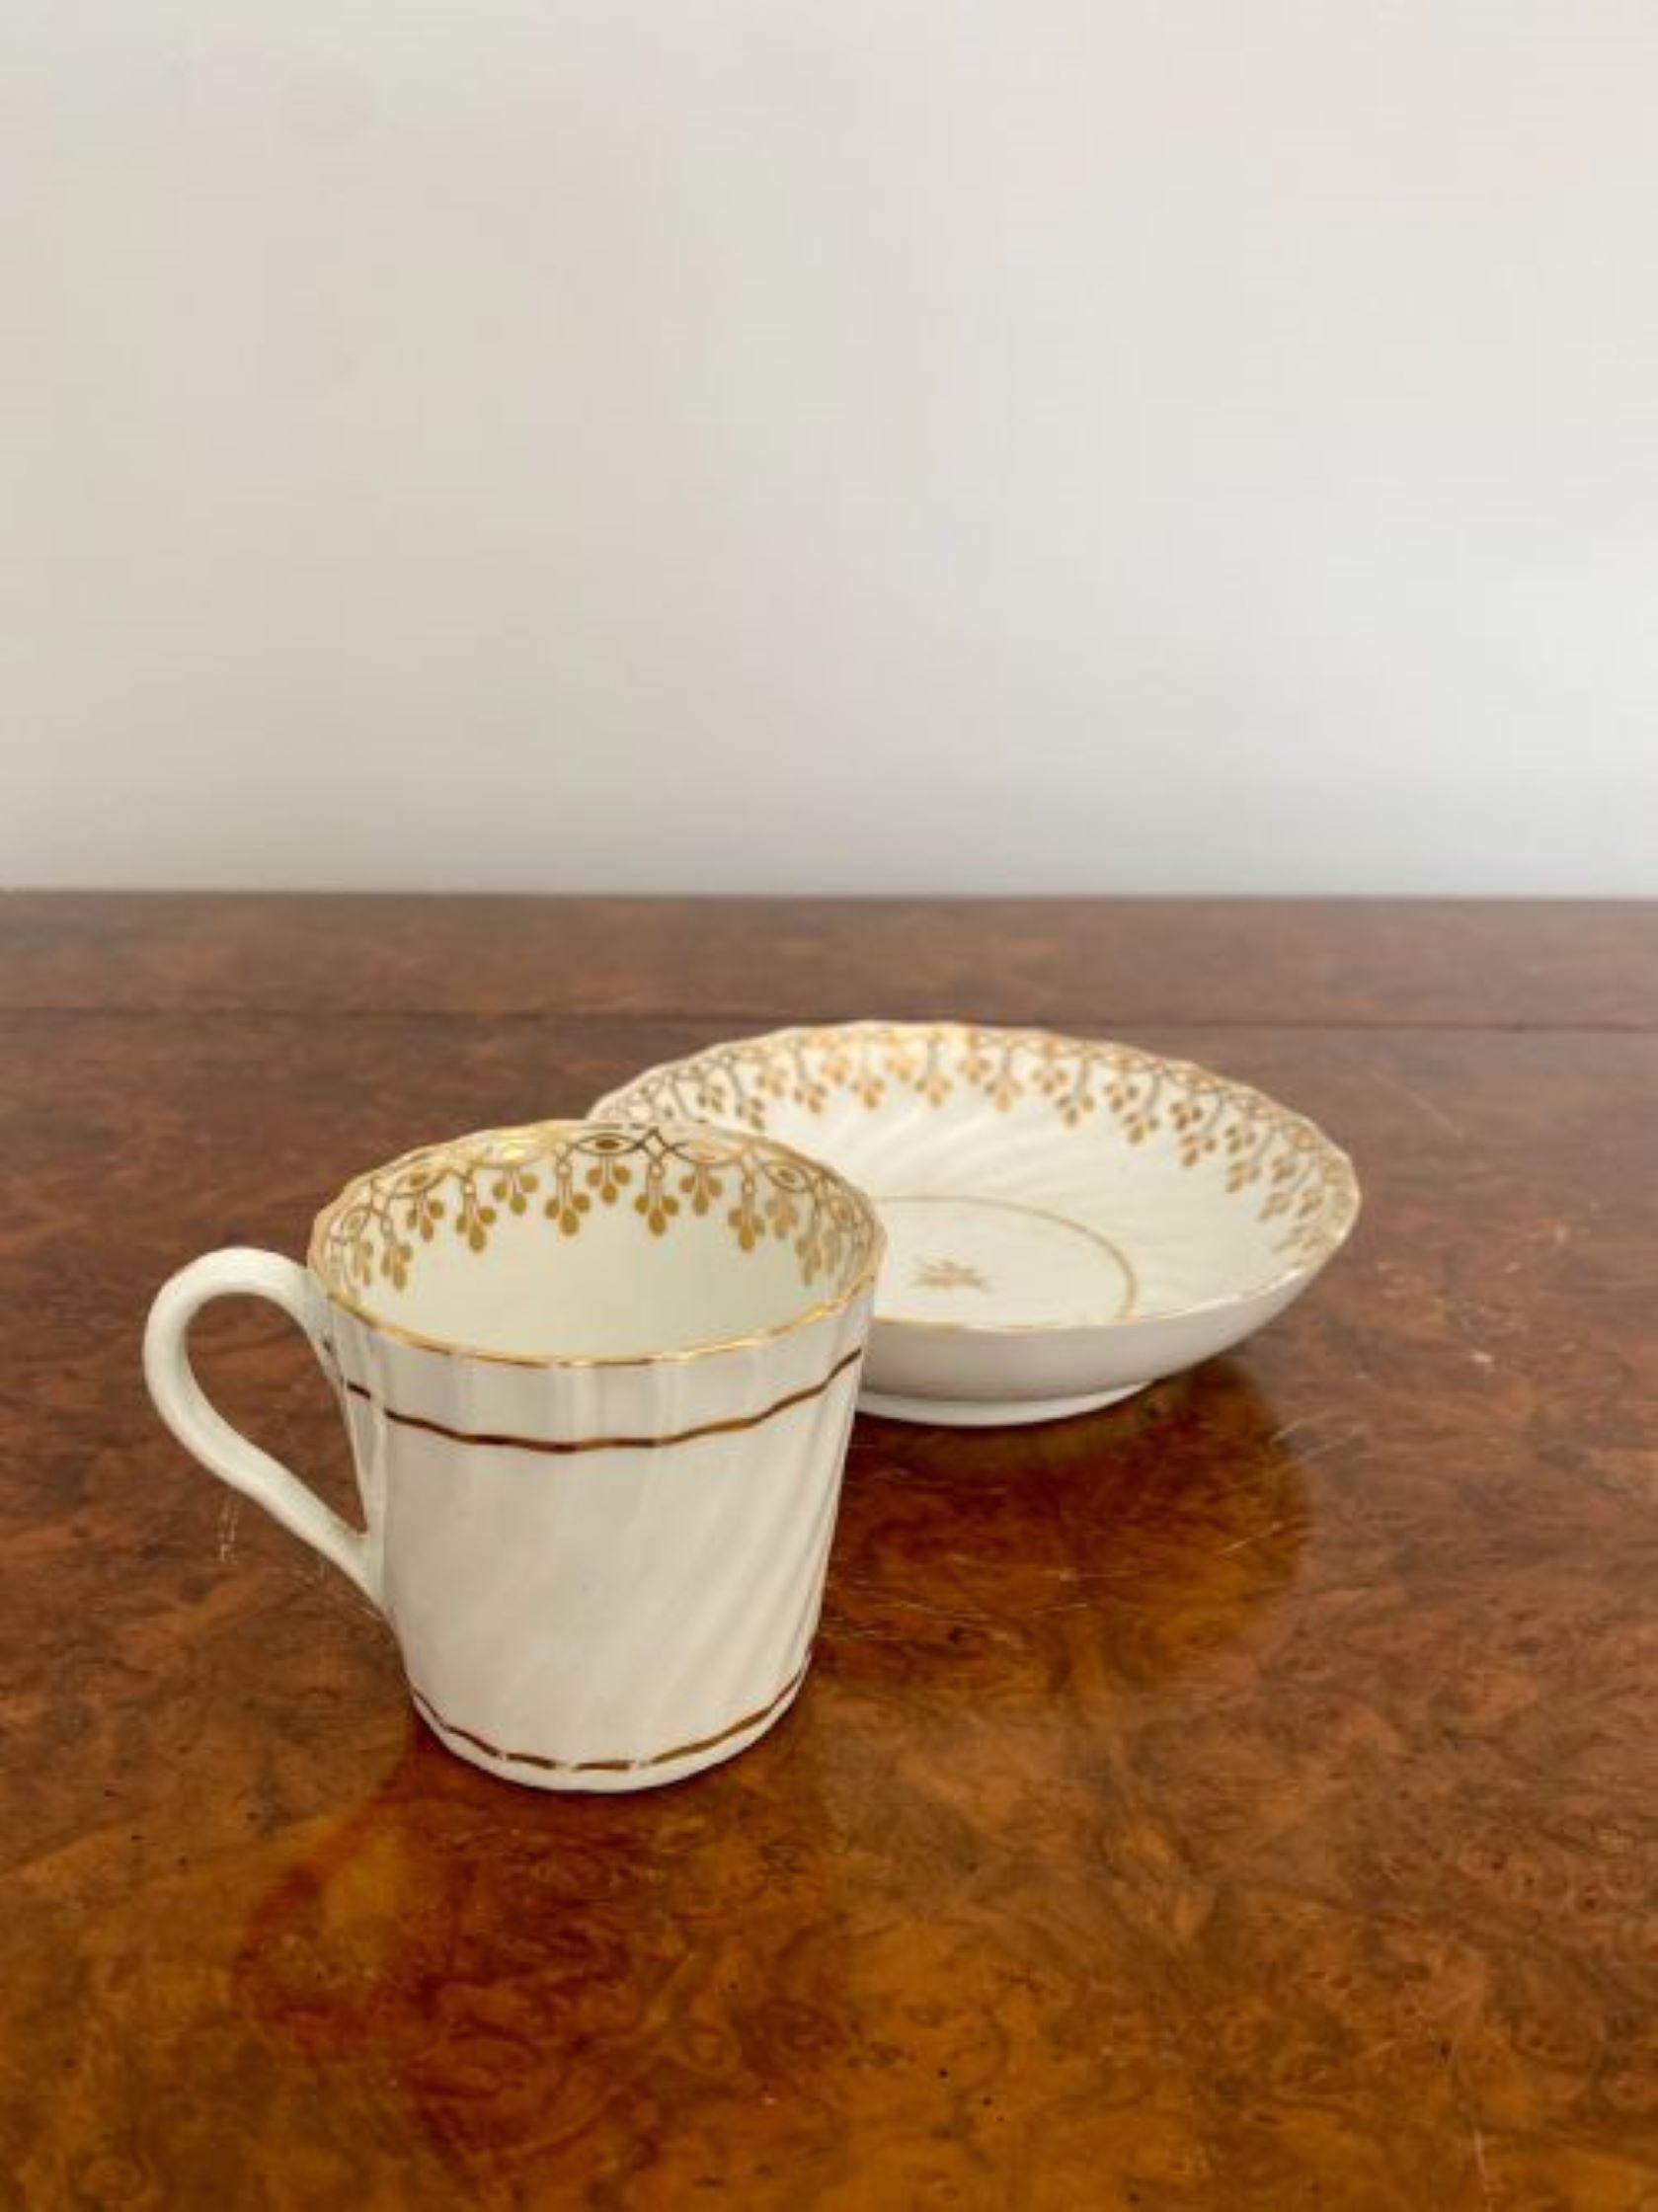 Quality pair of 19th Century teacups & saucers.
Quality pair of antique scalloped shaped teacups and saucers with gold gilded decoration. 